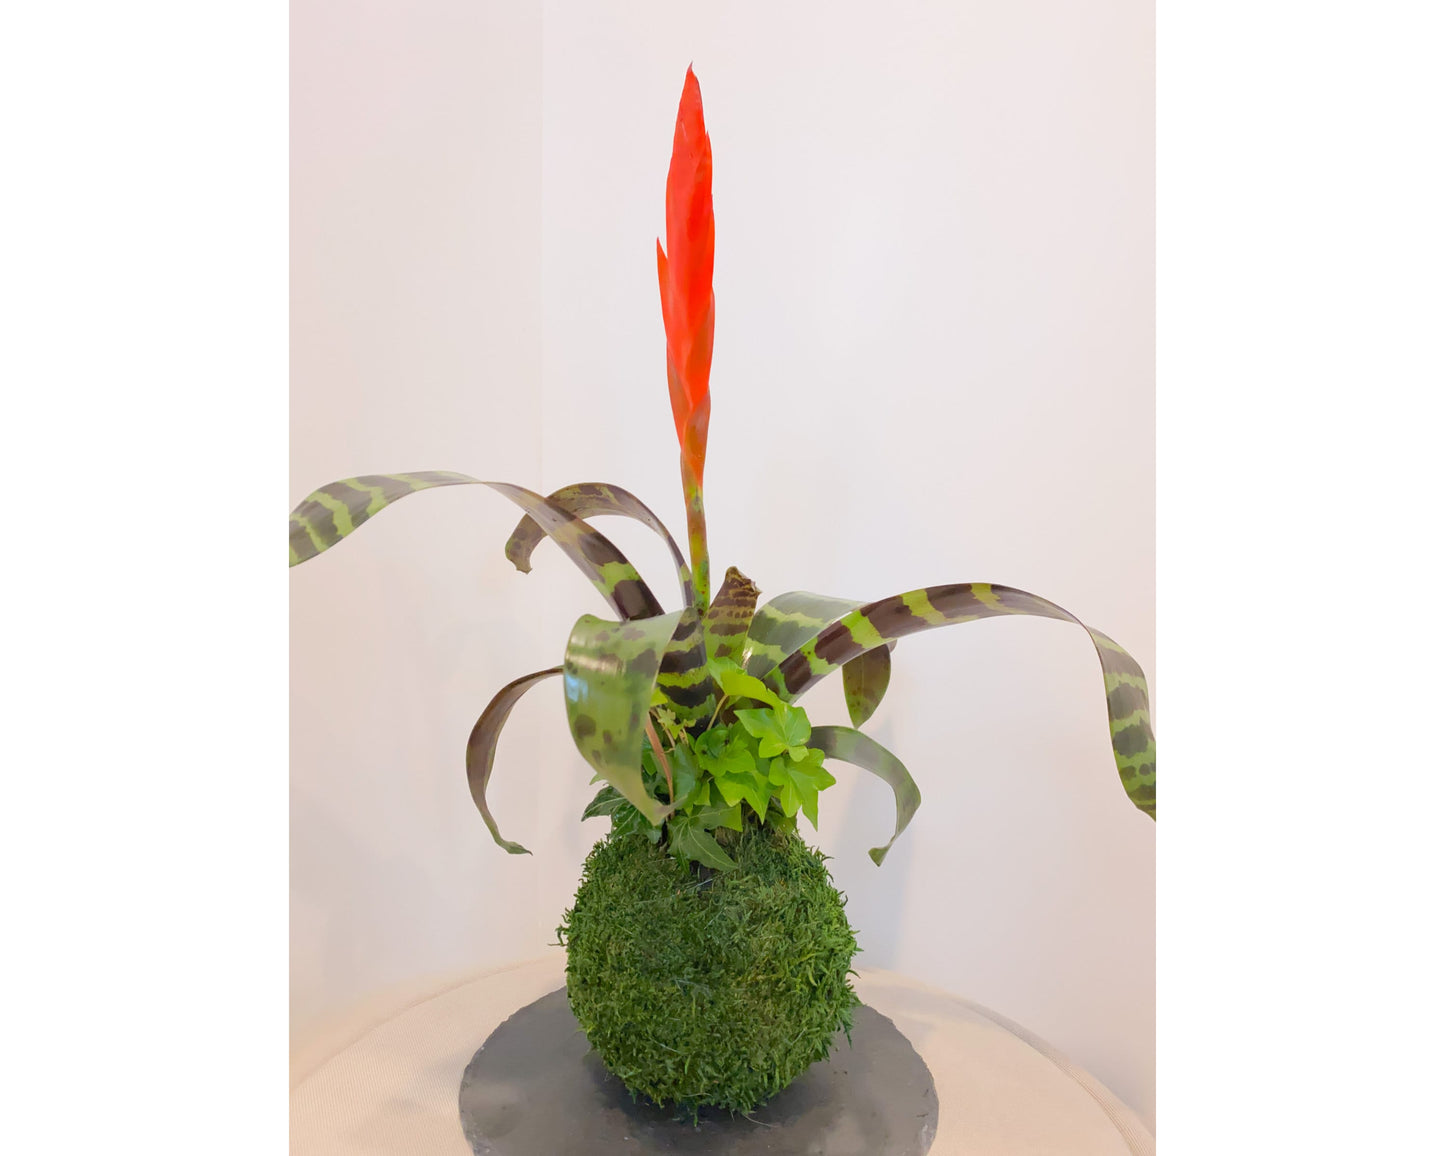 Kokedama - Moss ball with exotic Bromeliad Vriesea with Ivy arrangement.